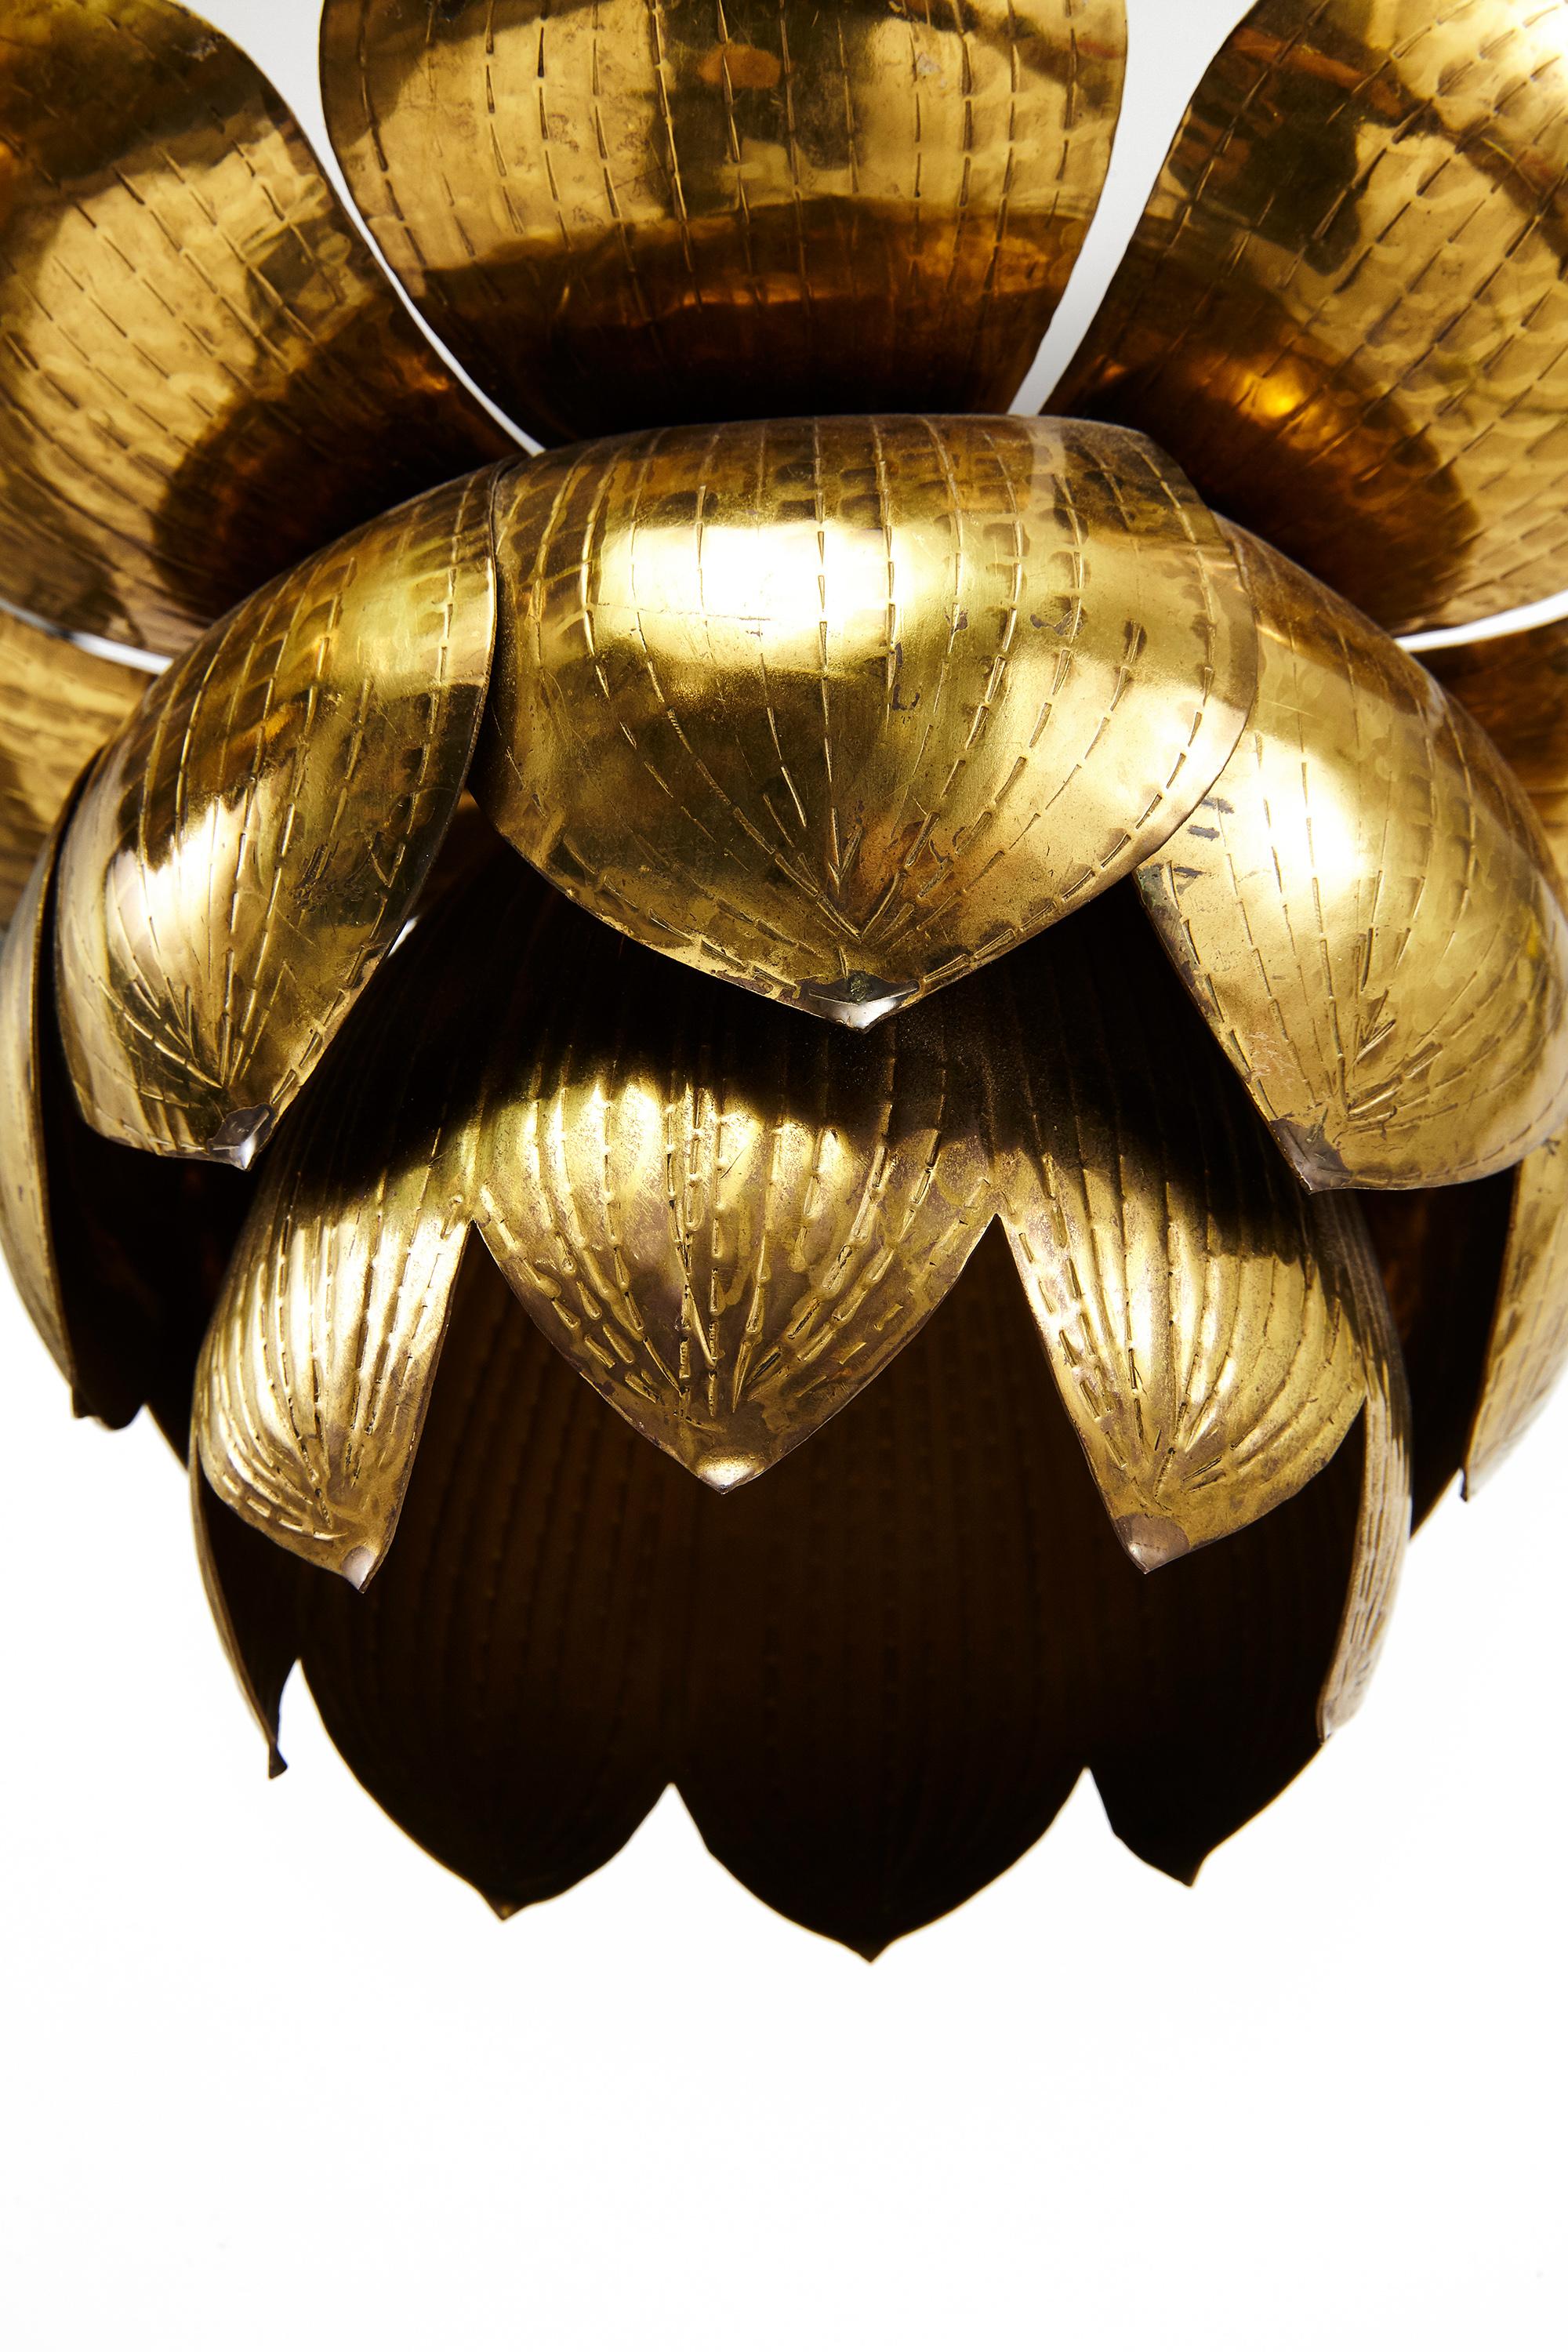 Stunning brass lotus pendant light fixture in the style of Parzinger by the Feldman Lighting Company, circa 1960. These highly glamorous Hollywood Regency style fixtures are in the organic shape of a lotus flower and look especially beautiful when